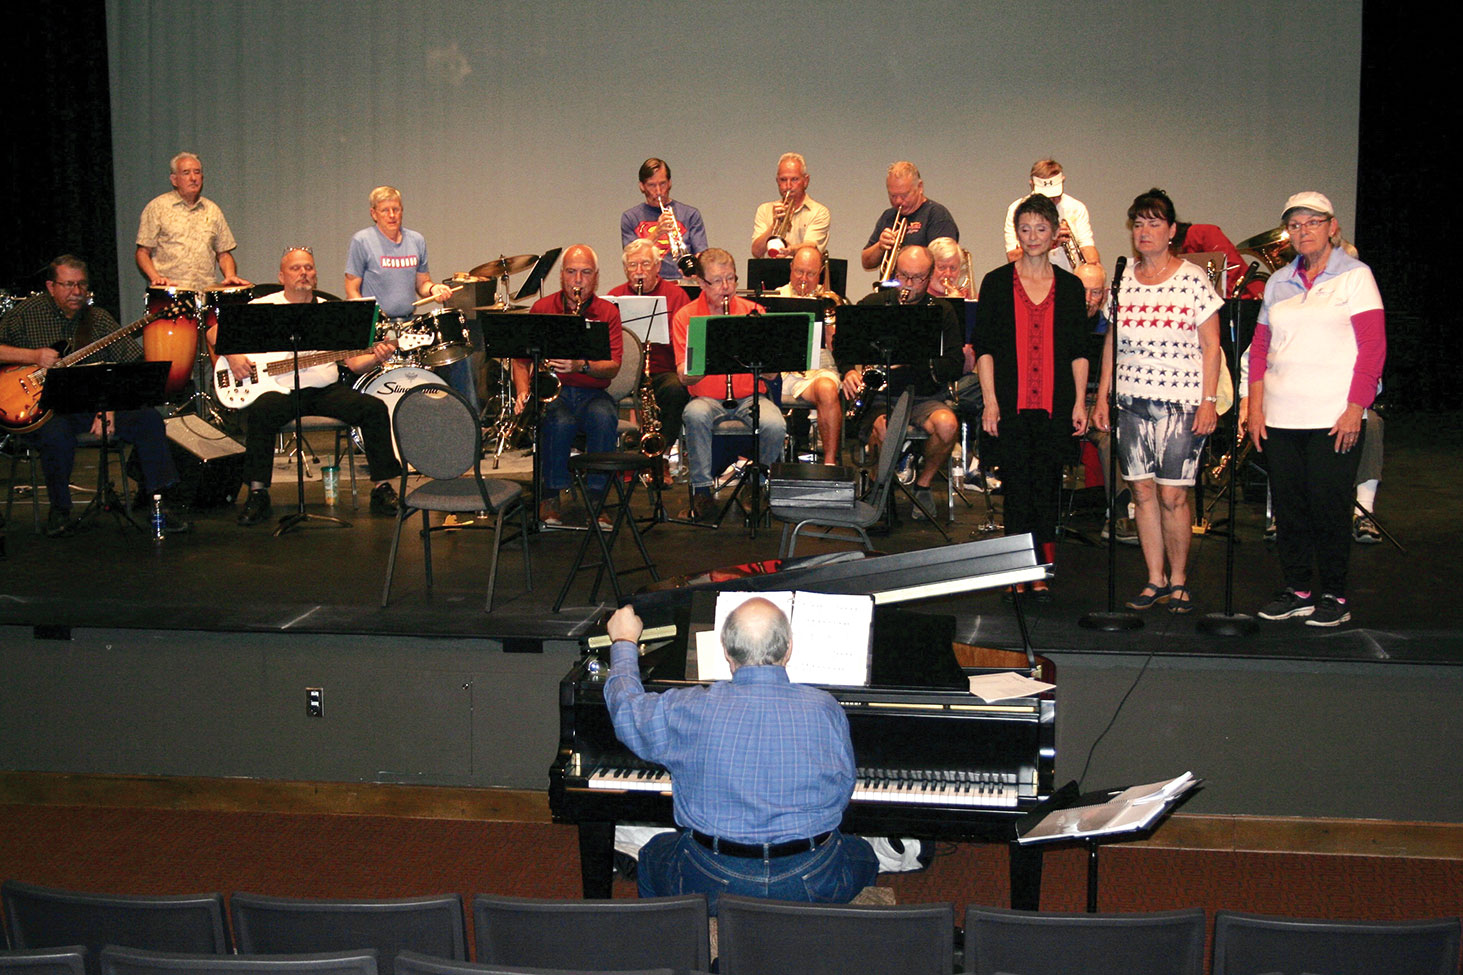 Bruce Birnel conducting the Big Band Orchestra with vocalists Nancy Davis, Pat Ingalls, Chanca Morrell as The Andrews Sisters